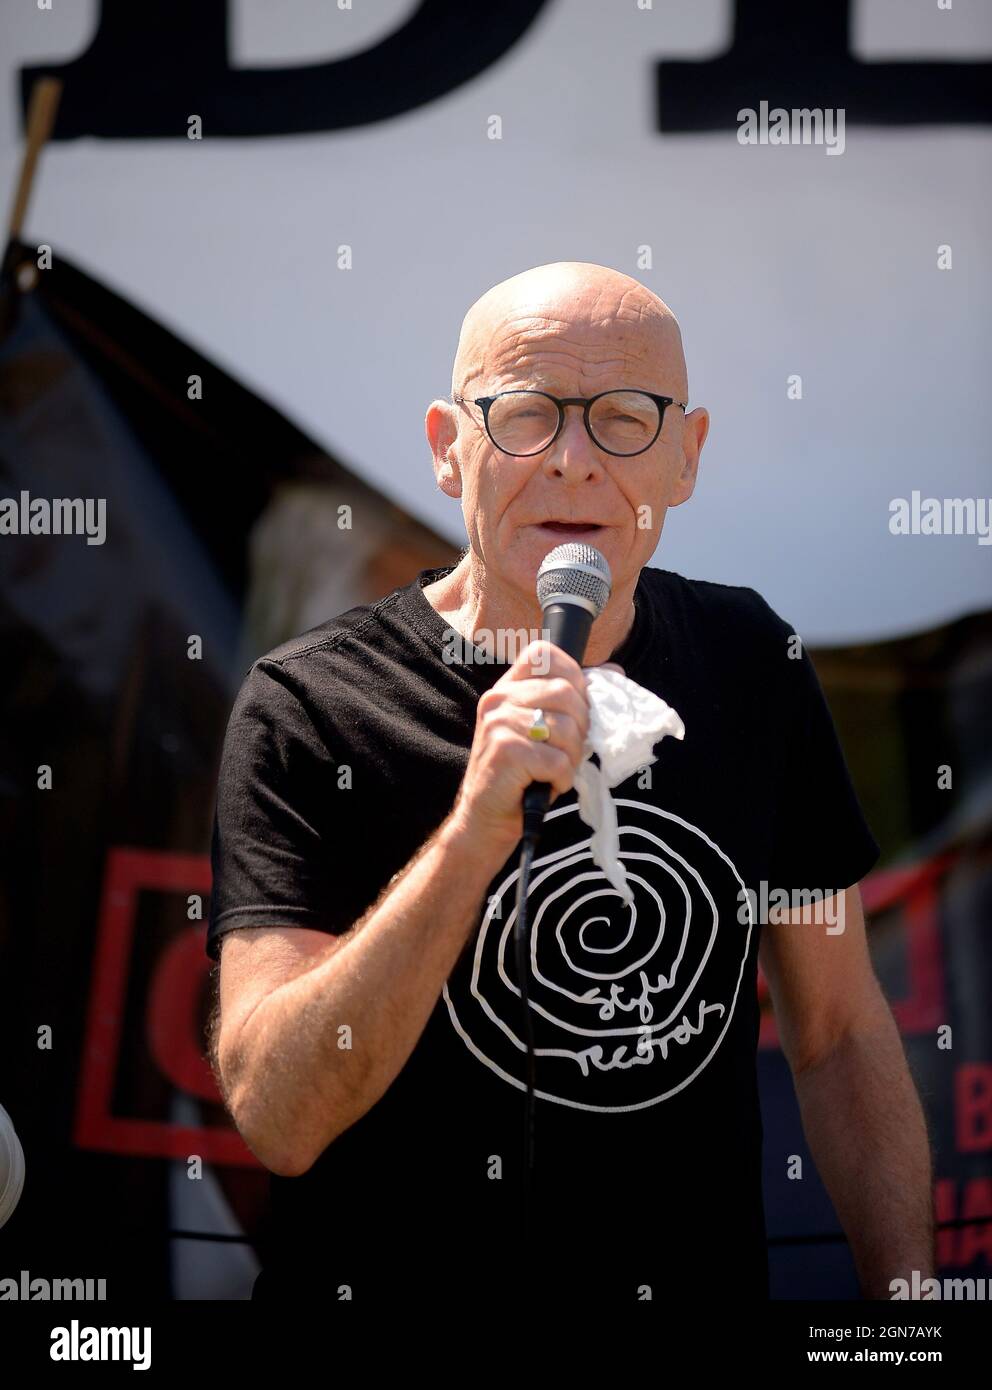 Eamonn McCann, veteran civil rights activist and campaigner pictured at a Bloody Sunday rally in Derry, Northern Ireland. June 2021. ©George Sweeney / Alamy Stock Photo Stock Photo